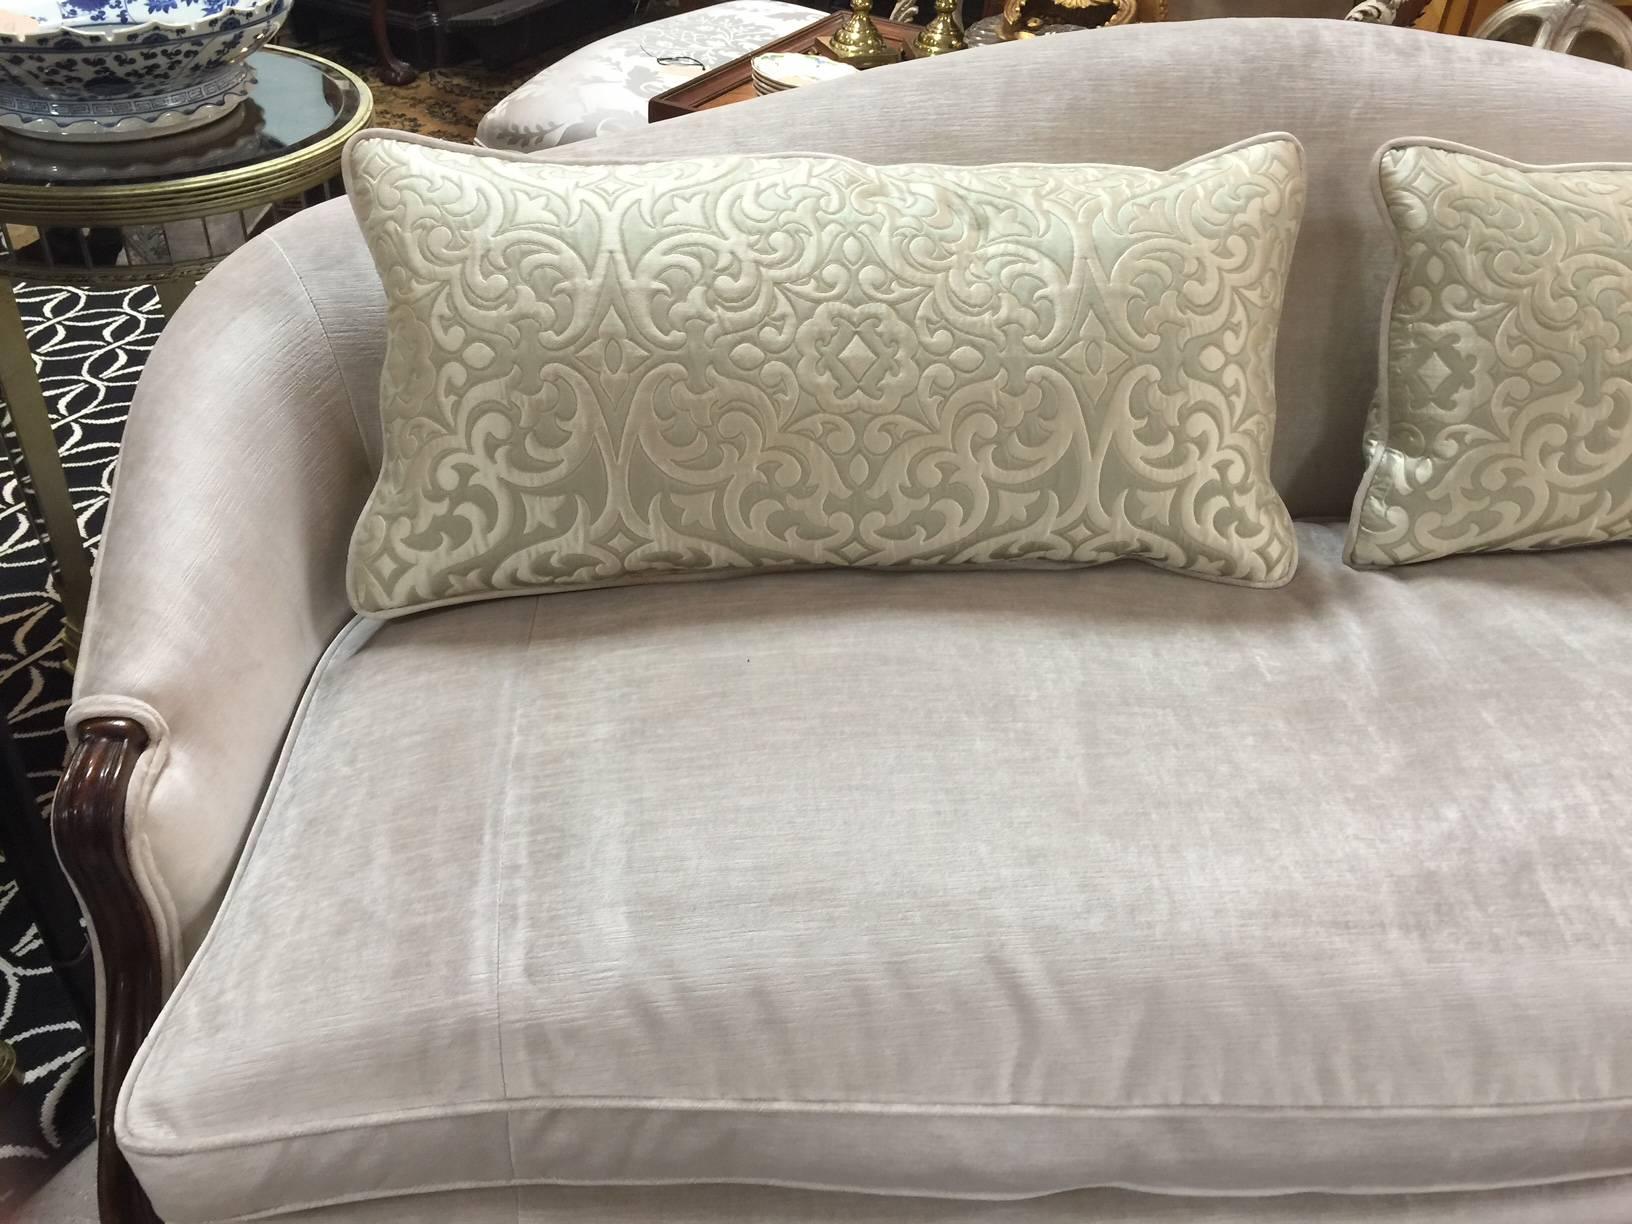 This sofa is newly upholstered in a soft creamy champagne color with coordinating lumbar pillows corded in velvet. The sofa has eight legs, simply carved, a single cushion, and down filled pillows, double piping detail.  Made by Drexel Heritage. 